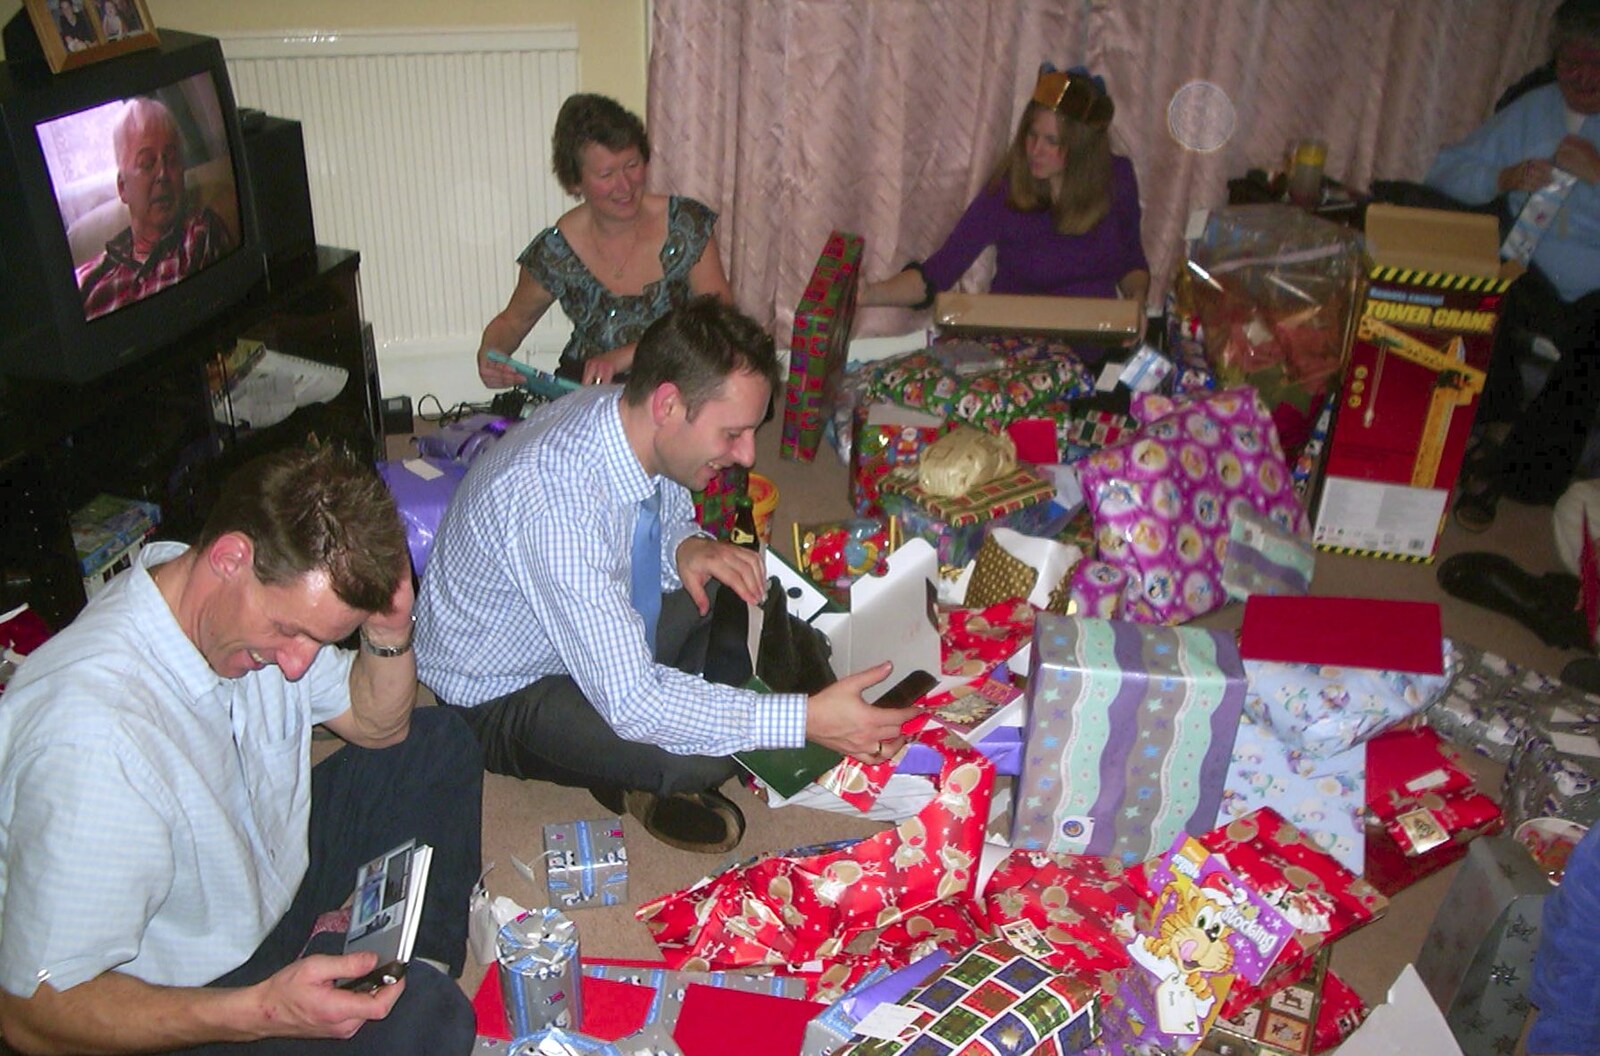 The room is full of presents and wrapping paper from Christmas at The Cottage, Thorpe St. Andrew, Norwich - 25th December 2003